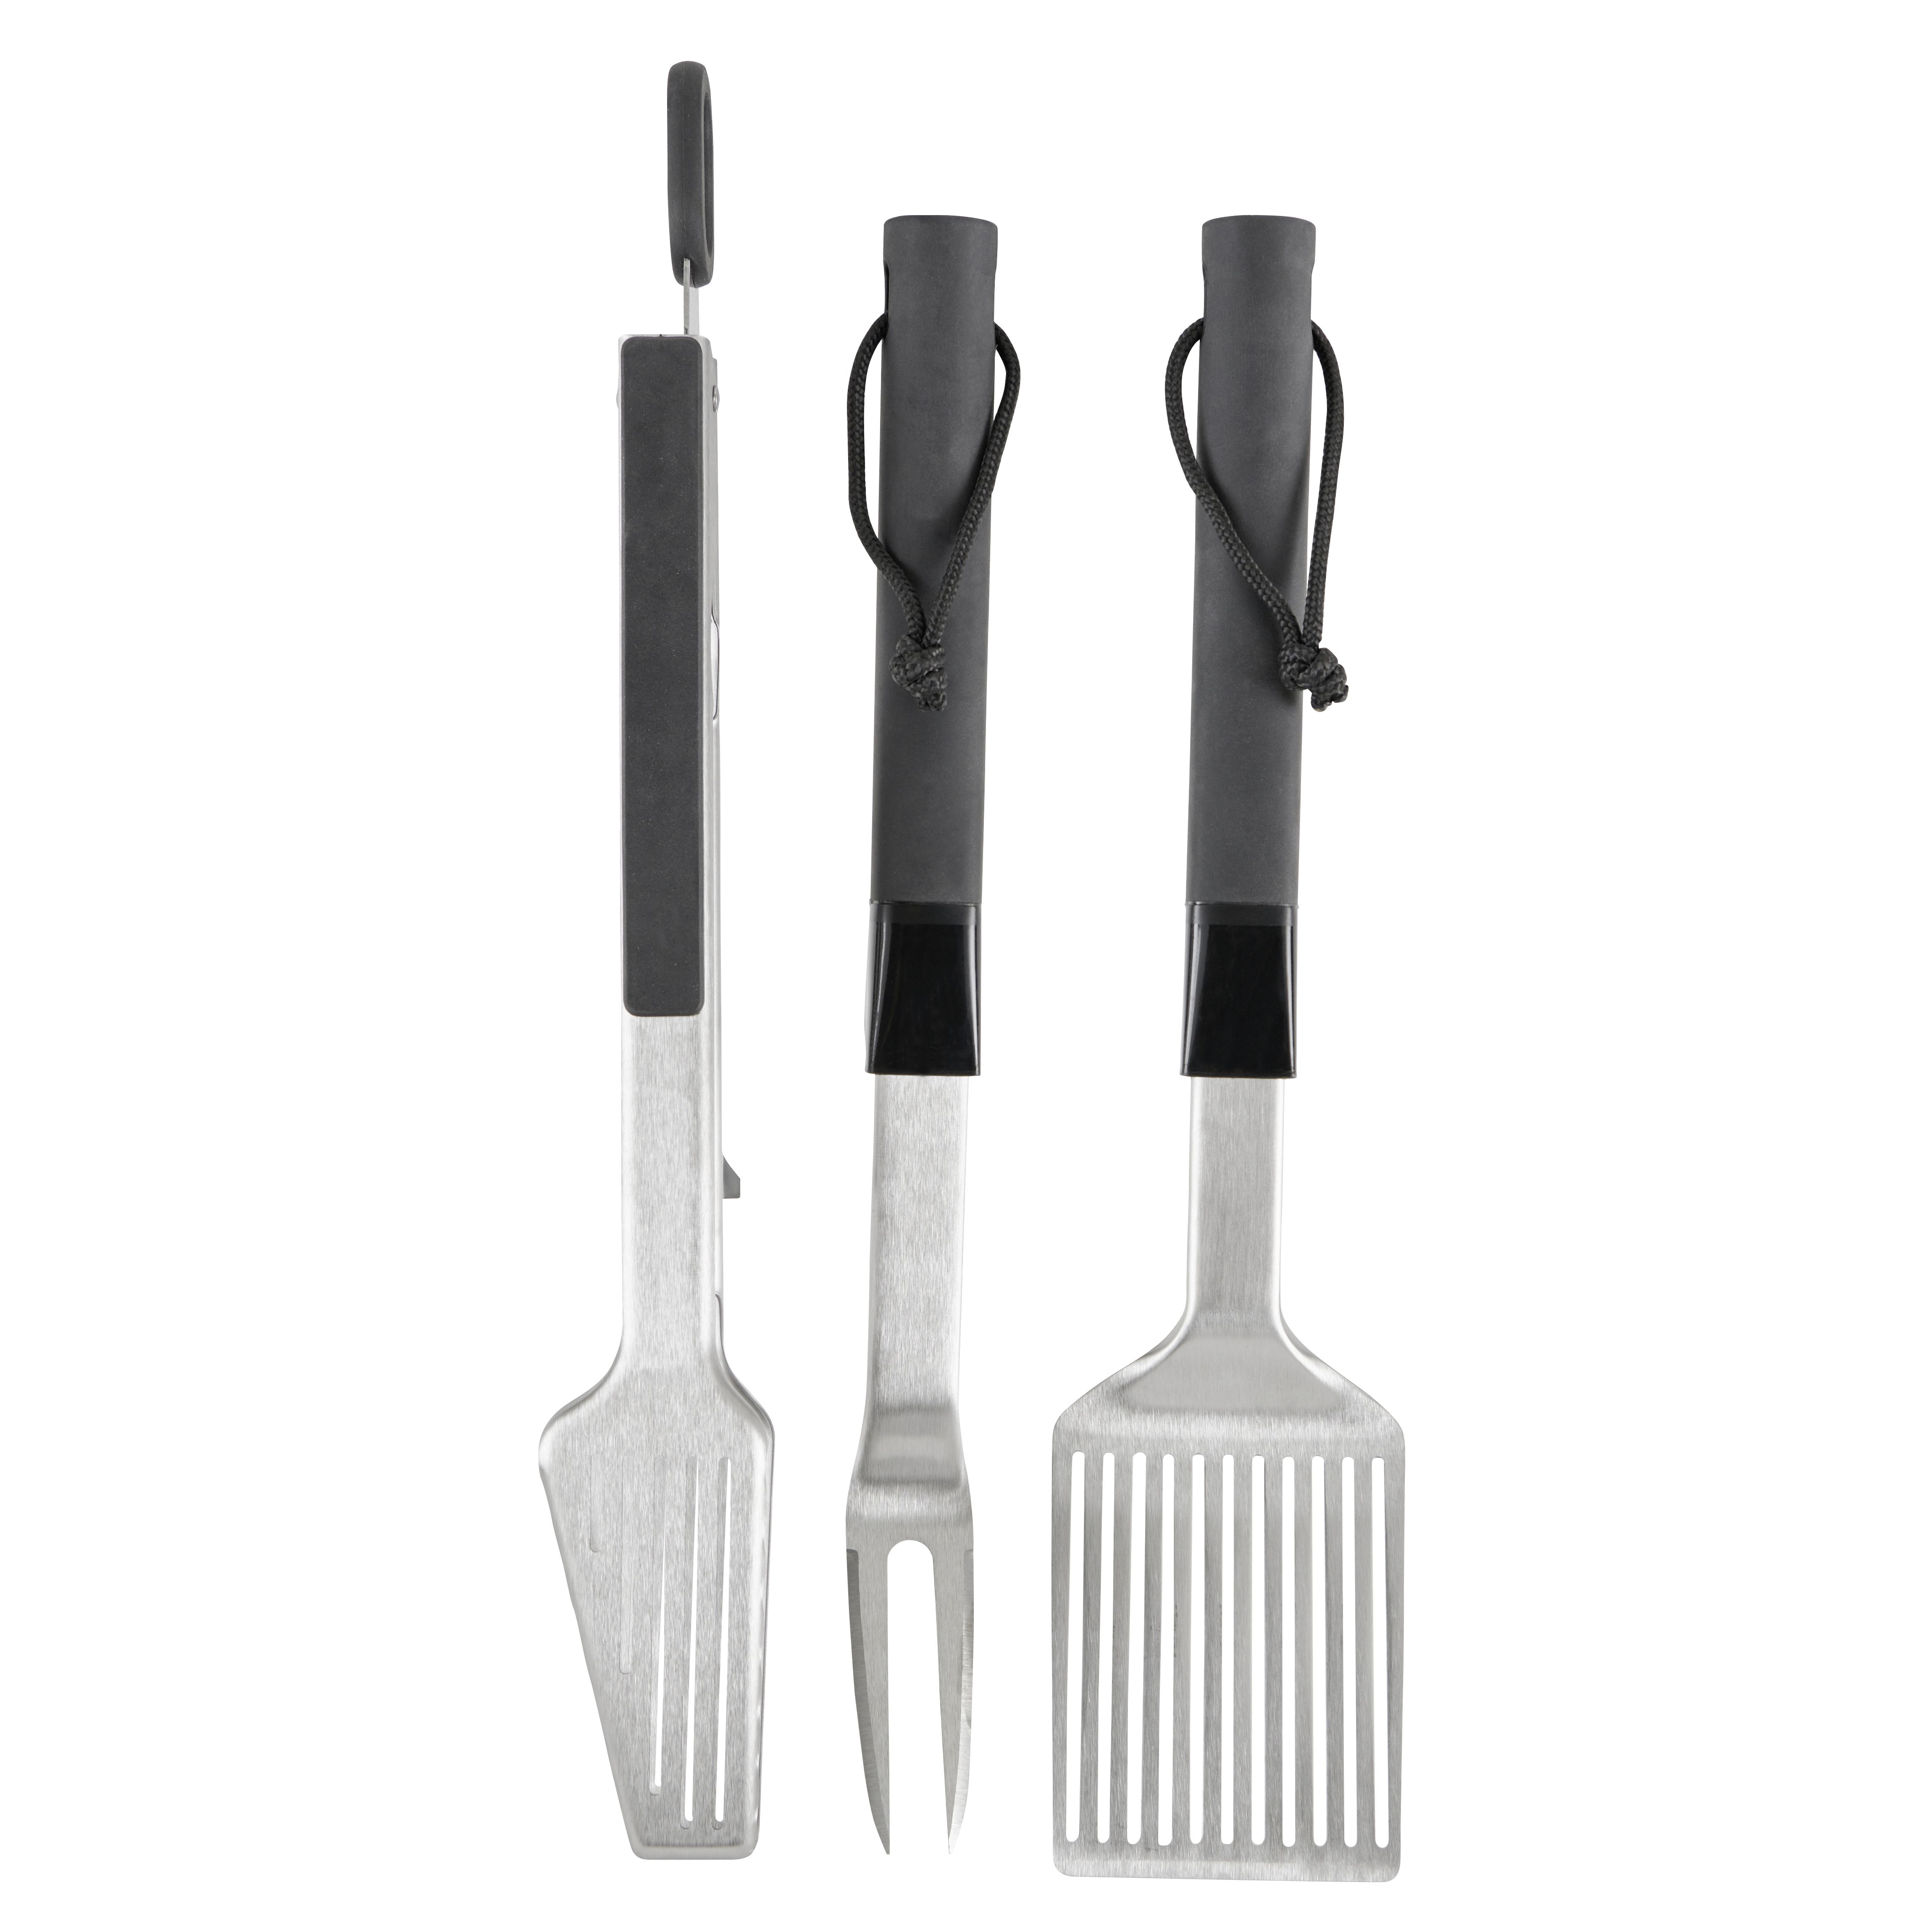 GoodHome Stainless steel 3 piece Barbecue tool set